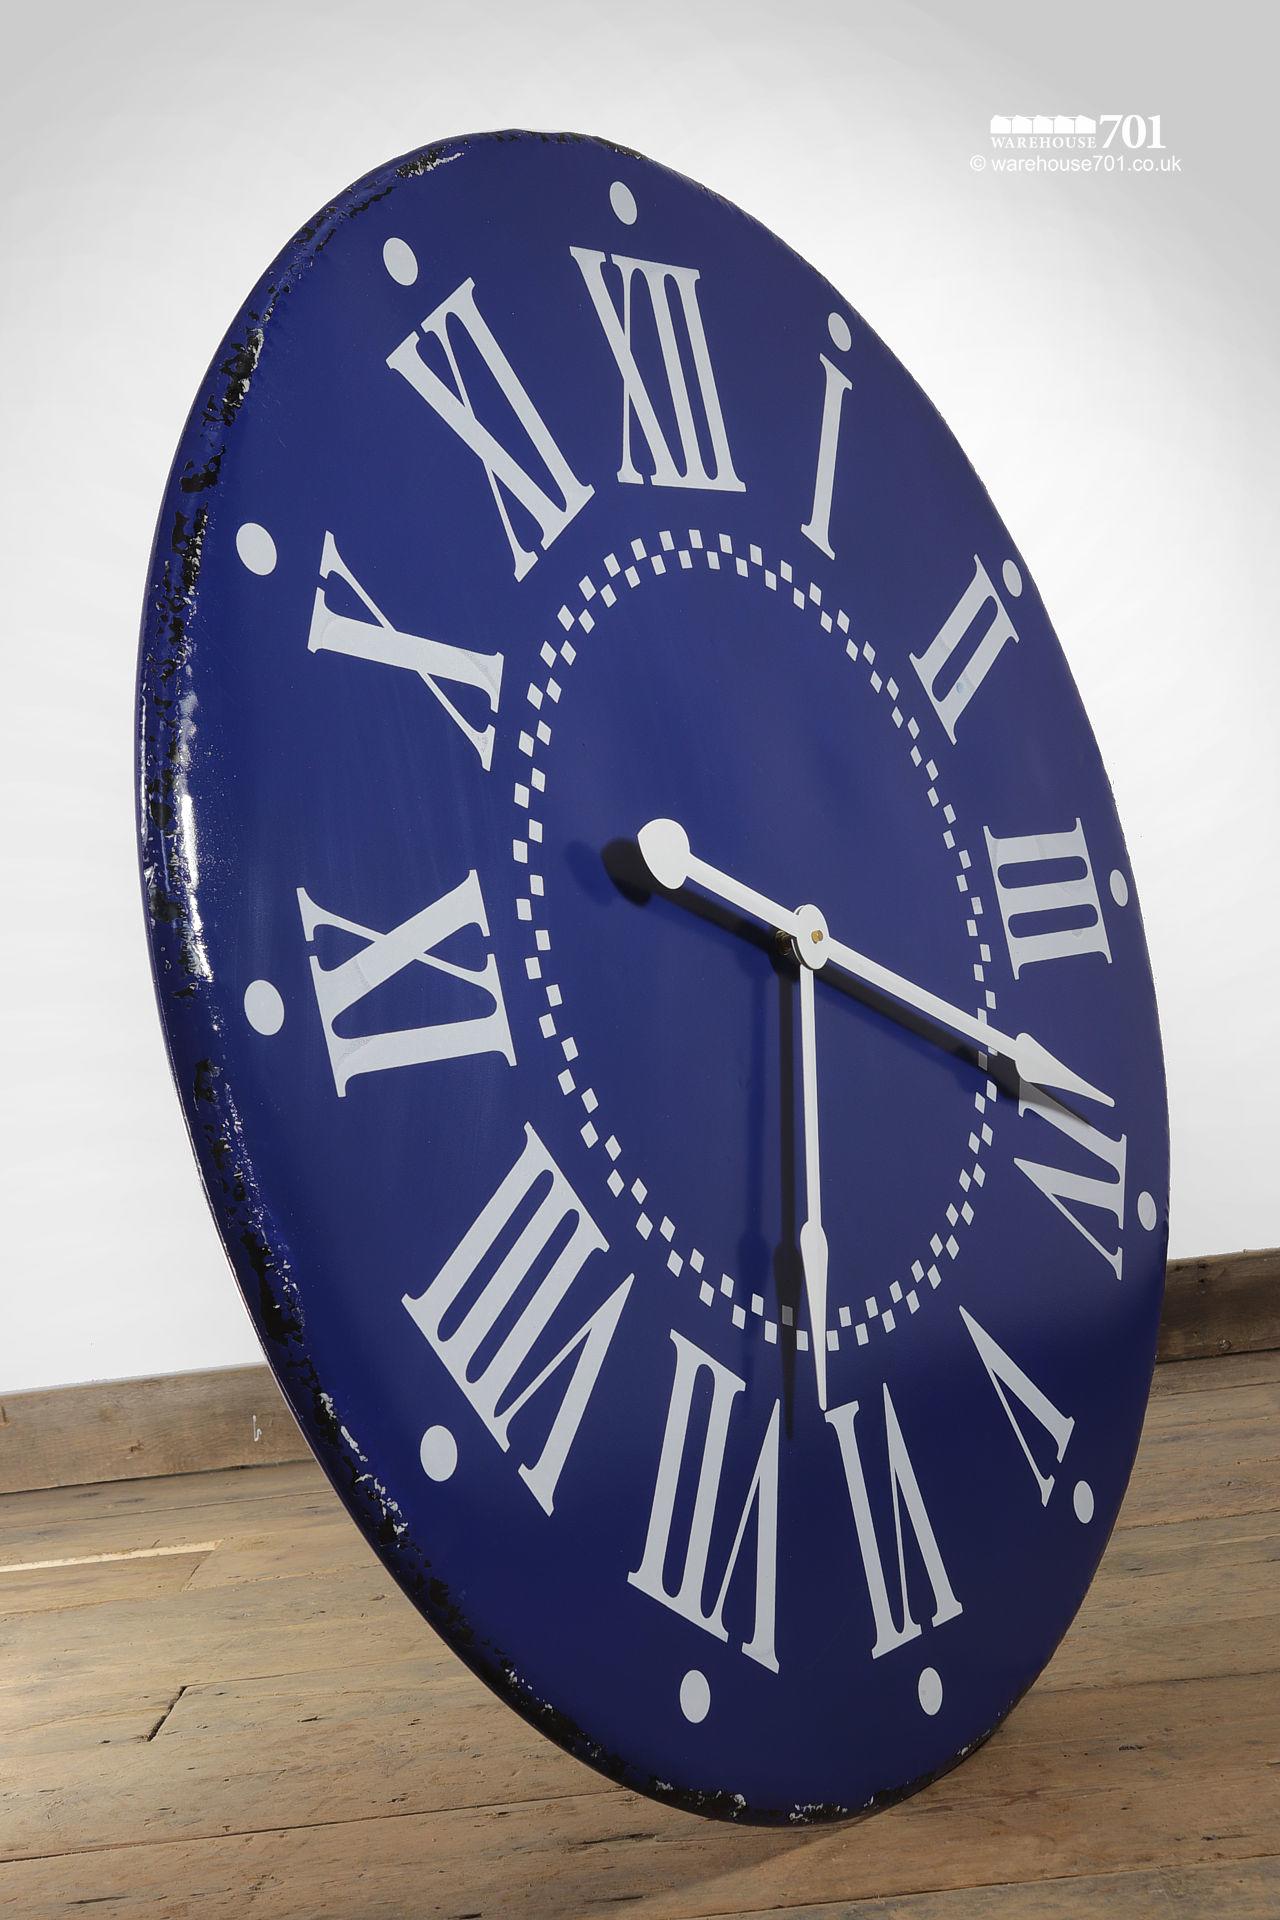 NEW Very Large Blue and White Metal Vintage Style Clock #2